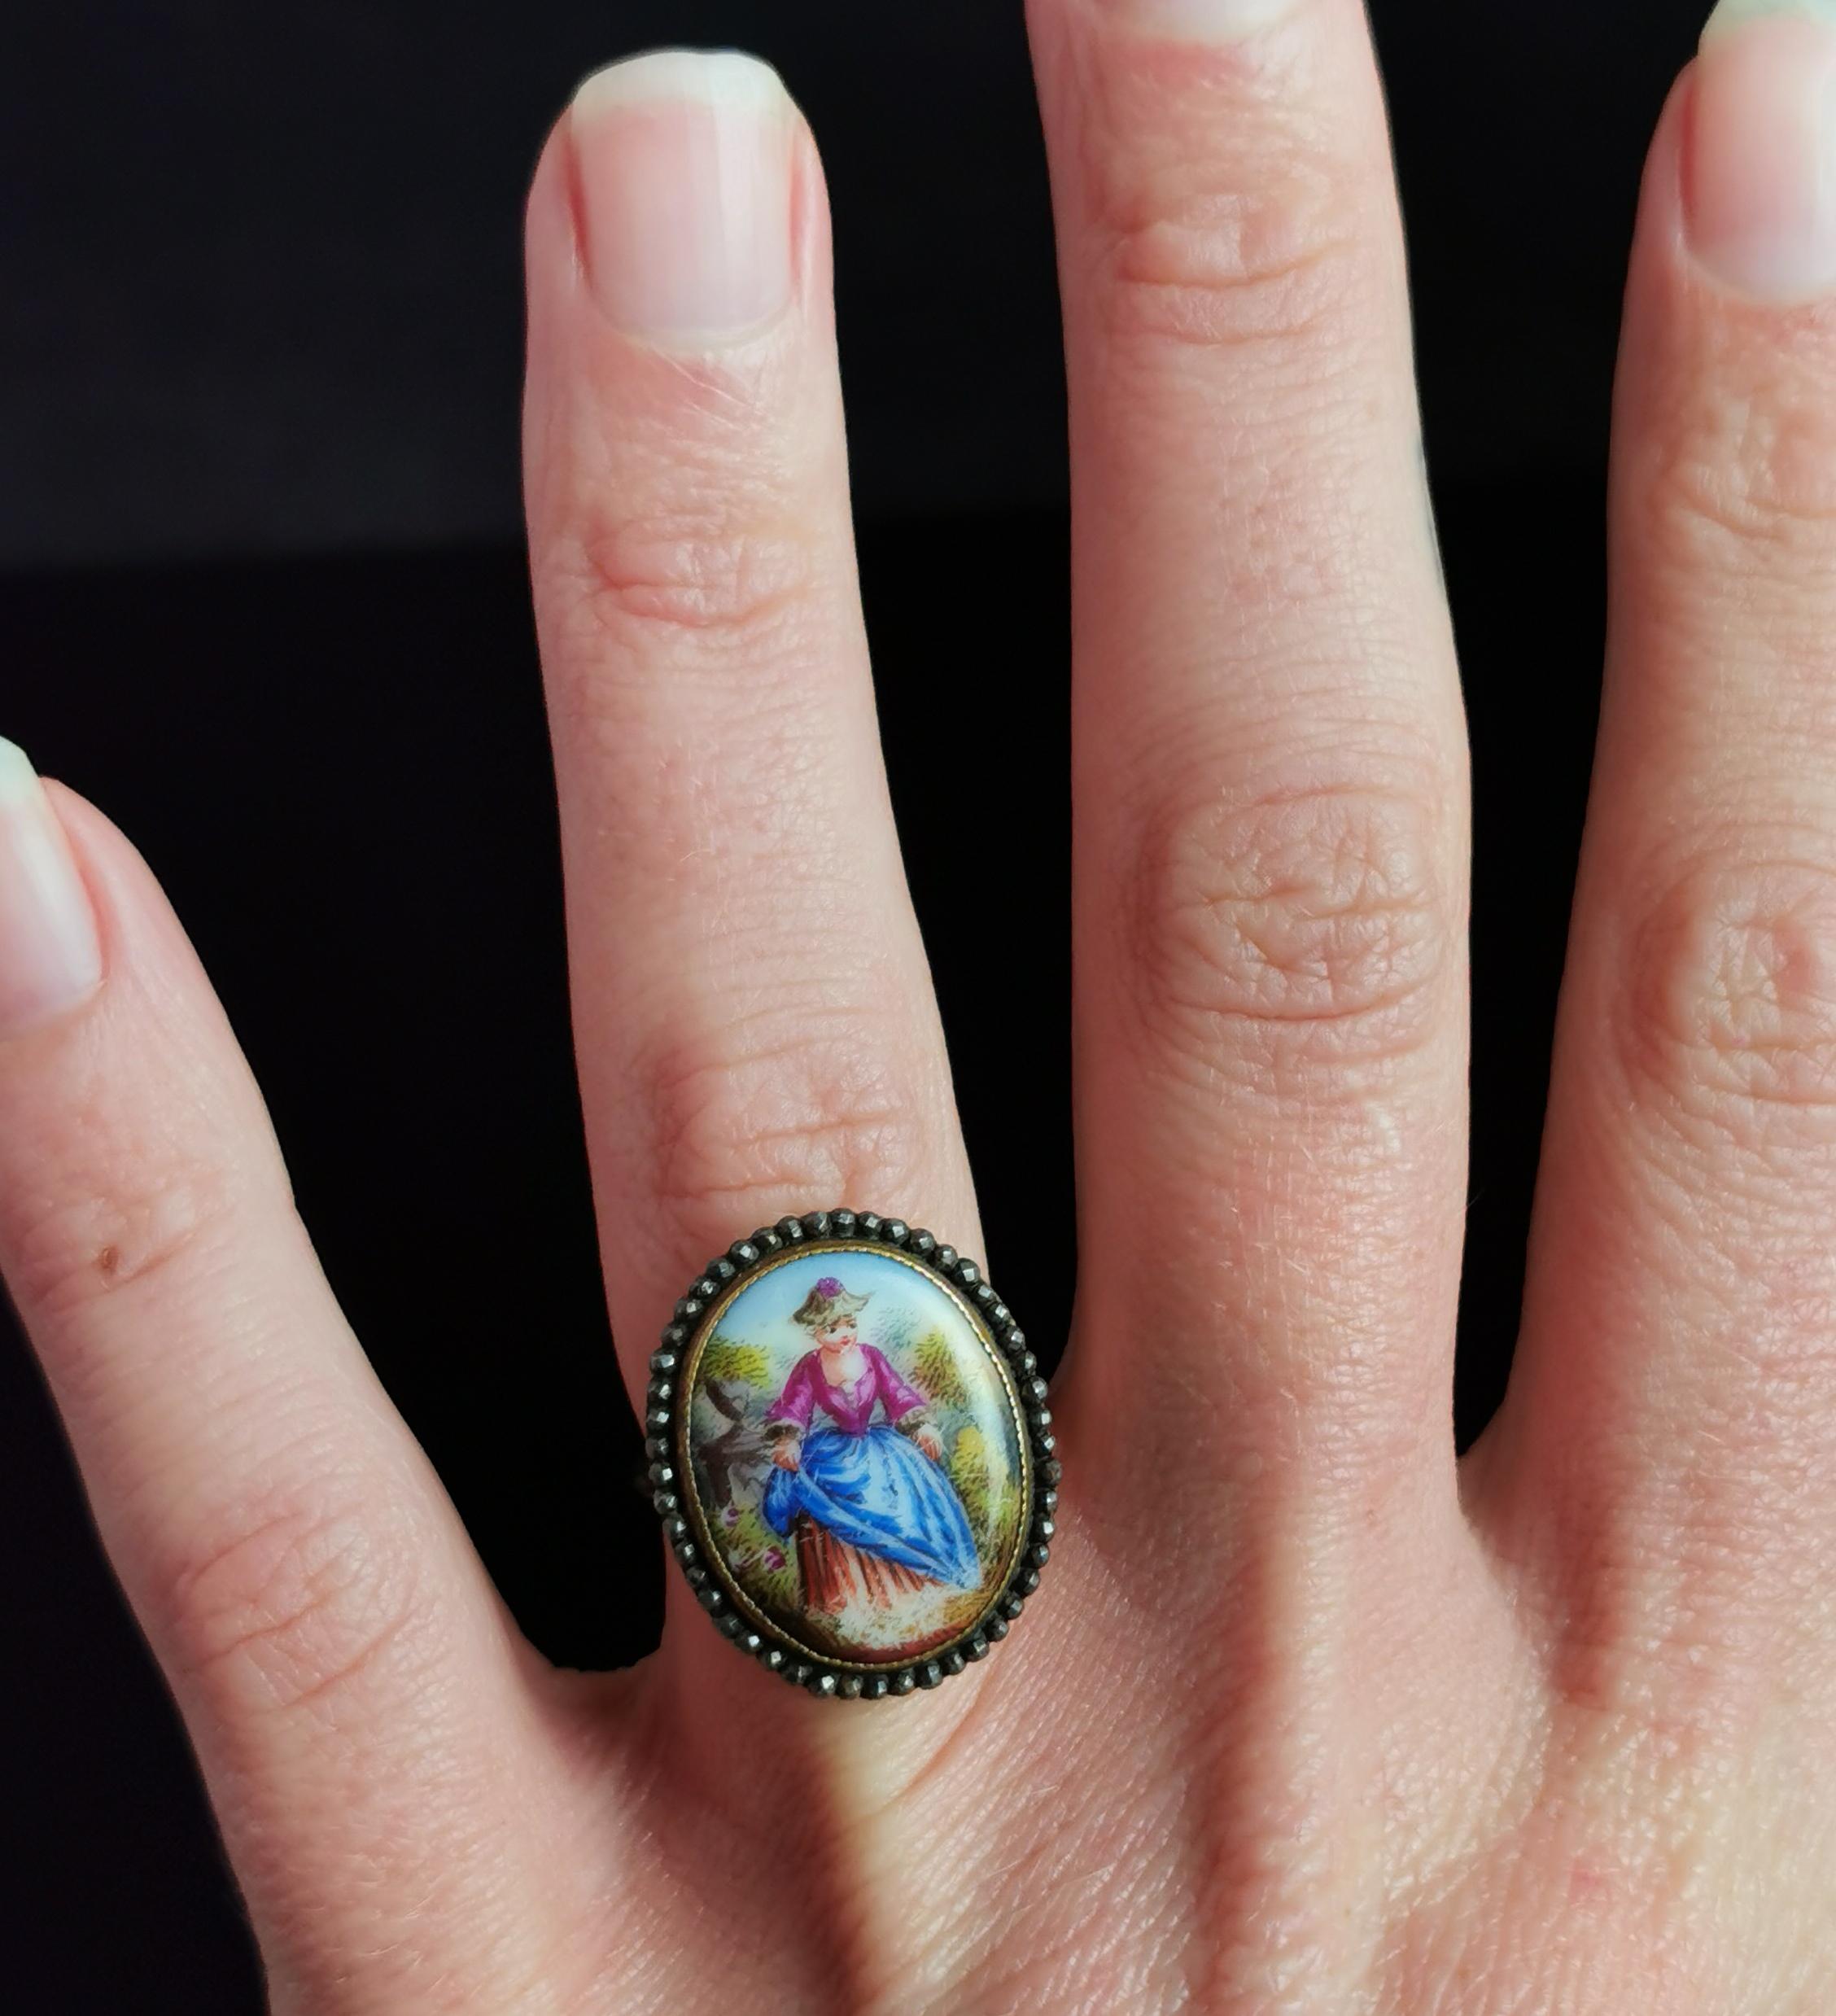 Antique Enamelled Portrait Ring, 9k Gold, Cut Steel and Mother of Pearl 6